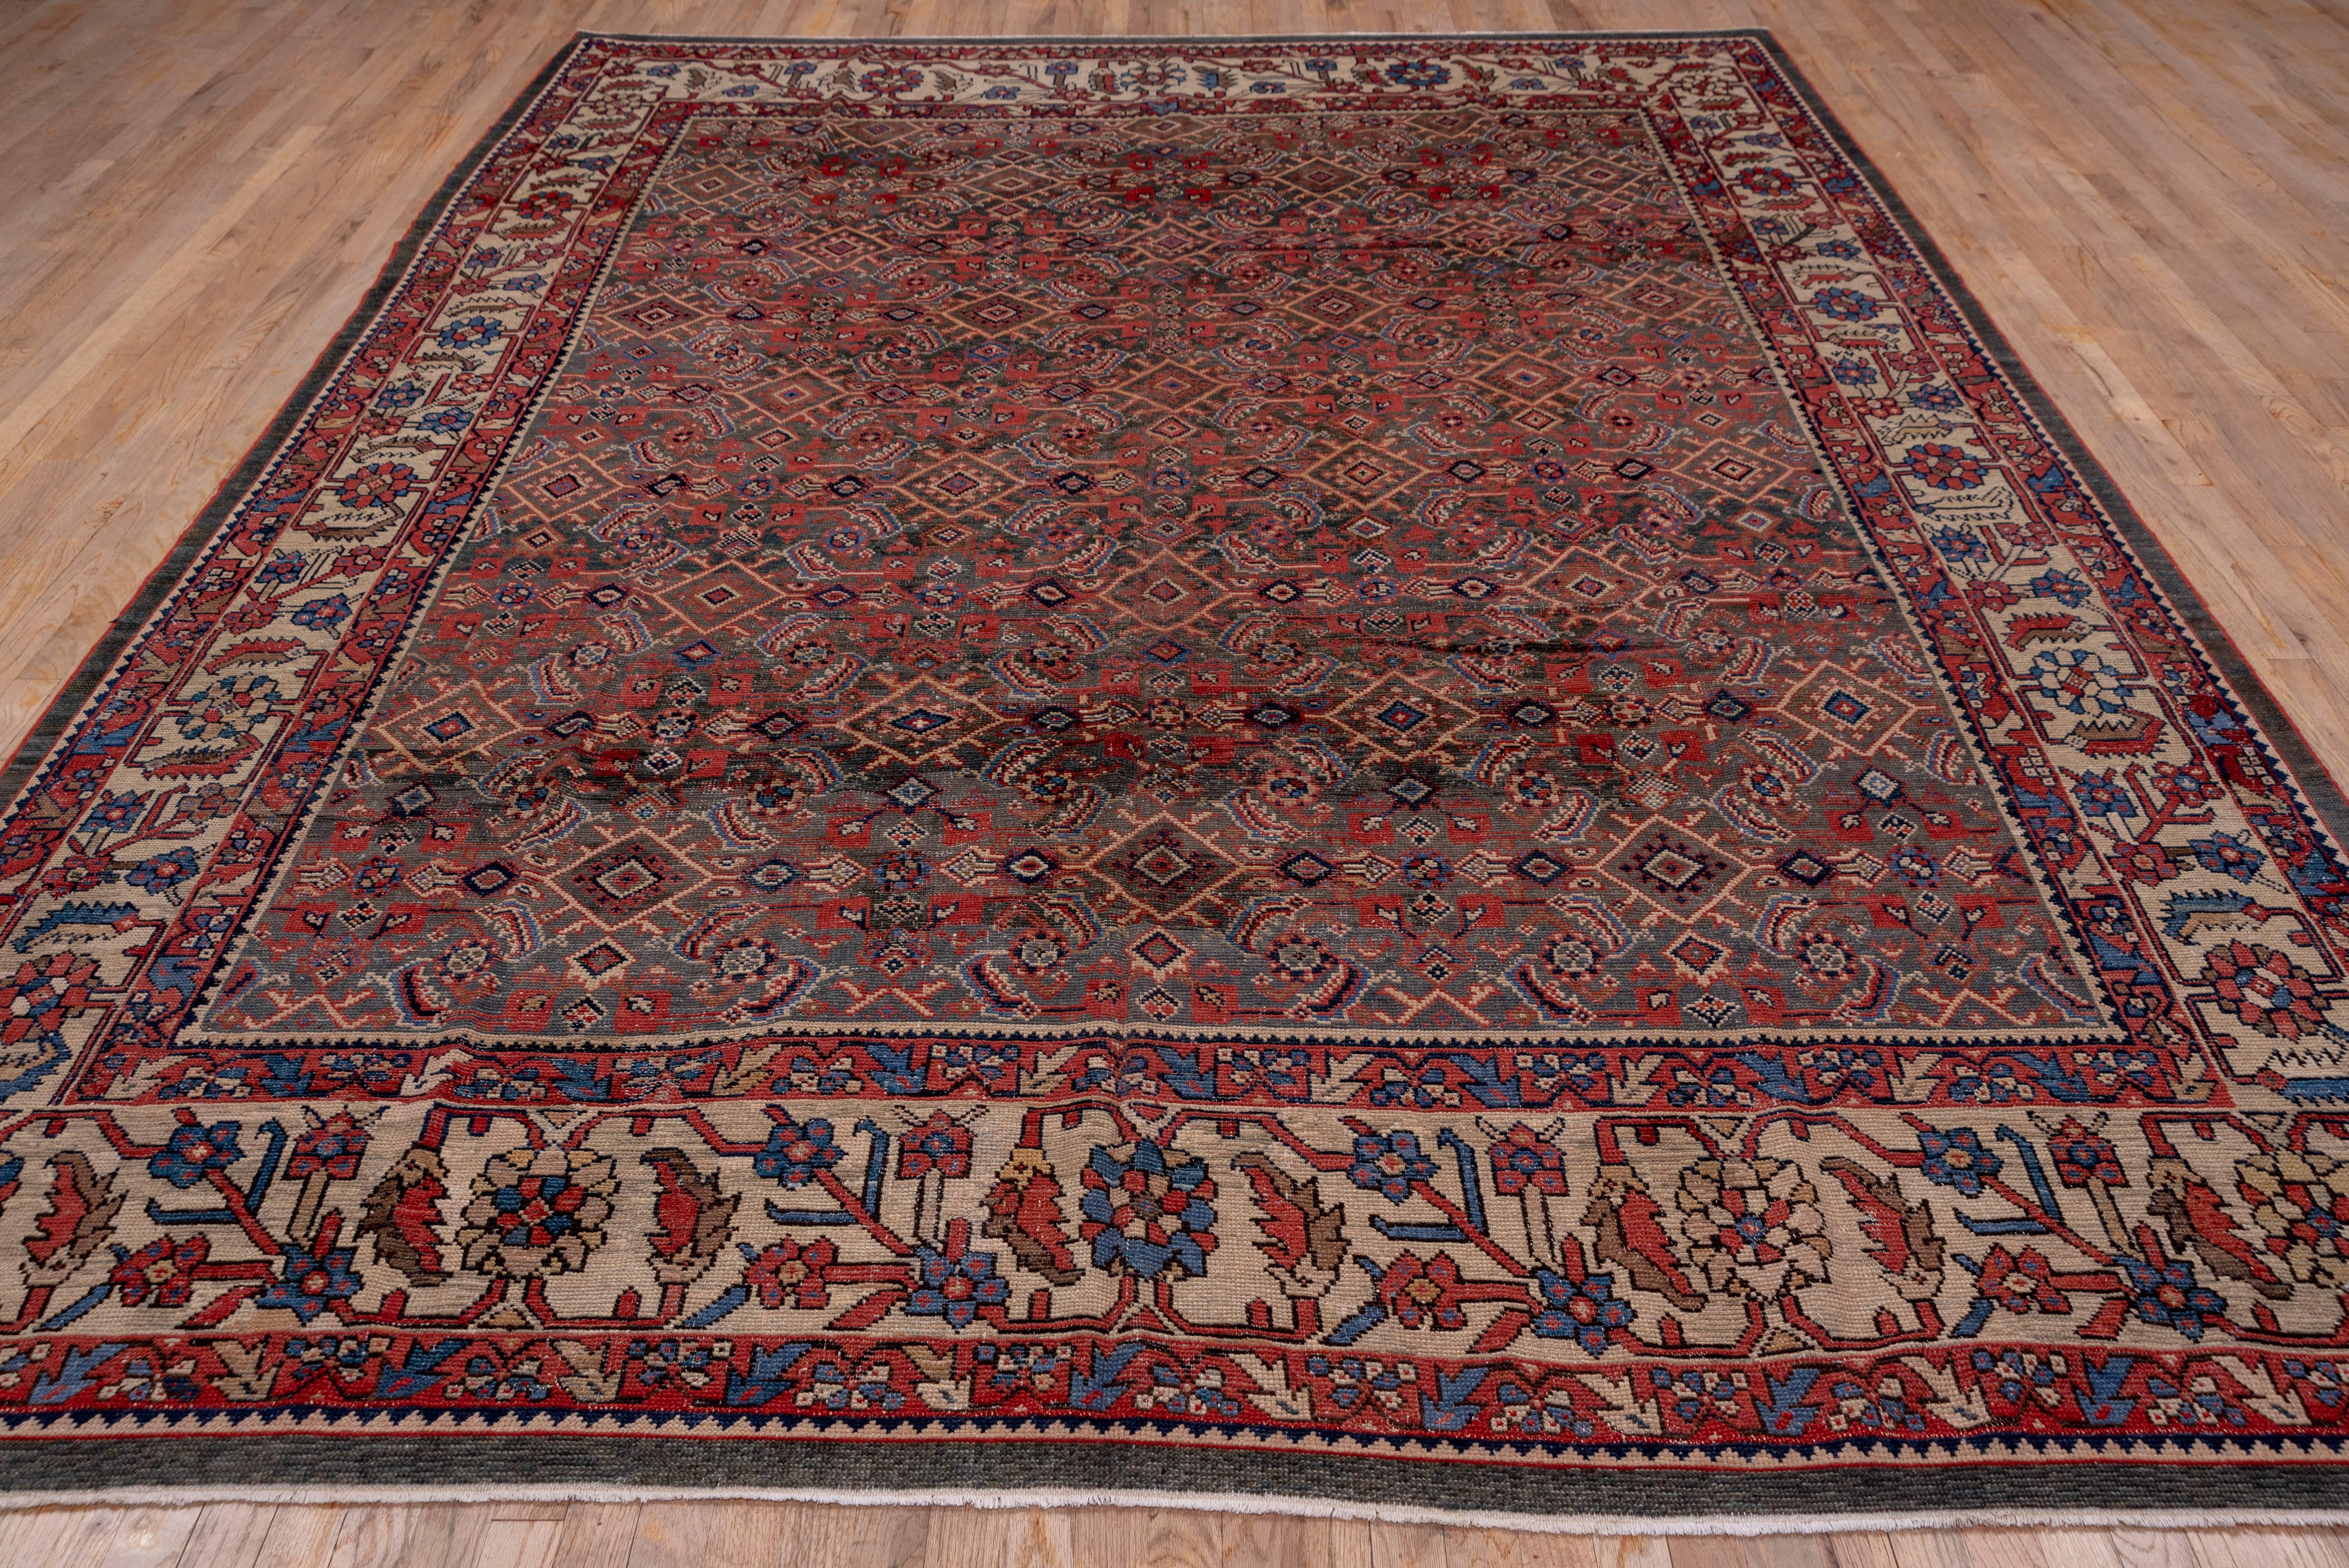 An ivory detailed allover Herati design fills the green field of this attractive west Persian rural carpet. The ivory main border employs the triple posy 